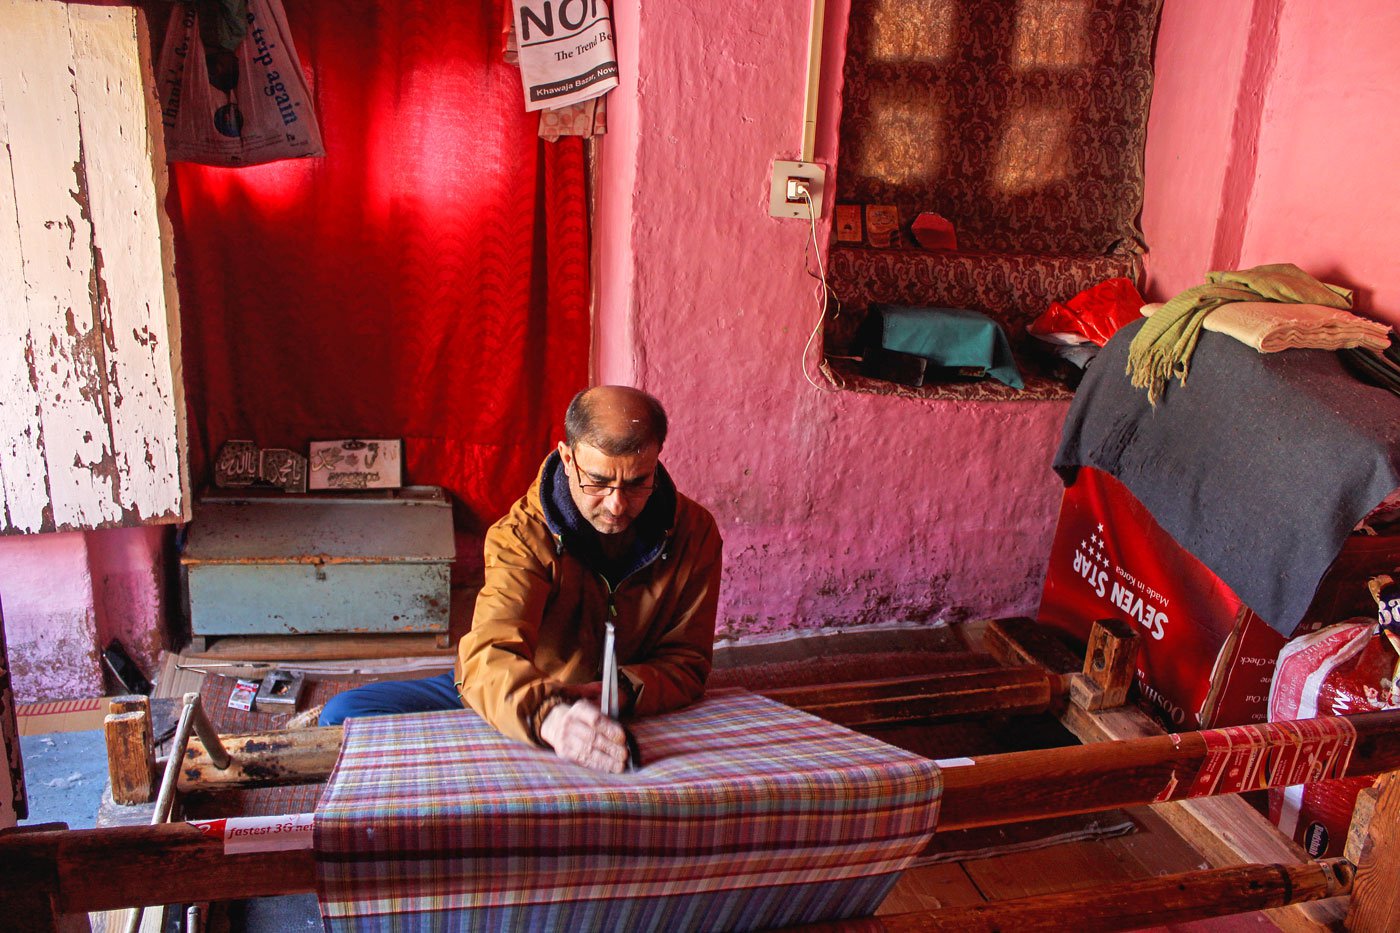 Abdul Majeed Lone works on a pashmina shawl tautly stretched across the wooden loom in front